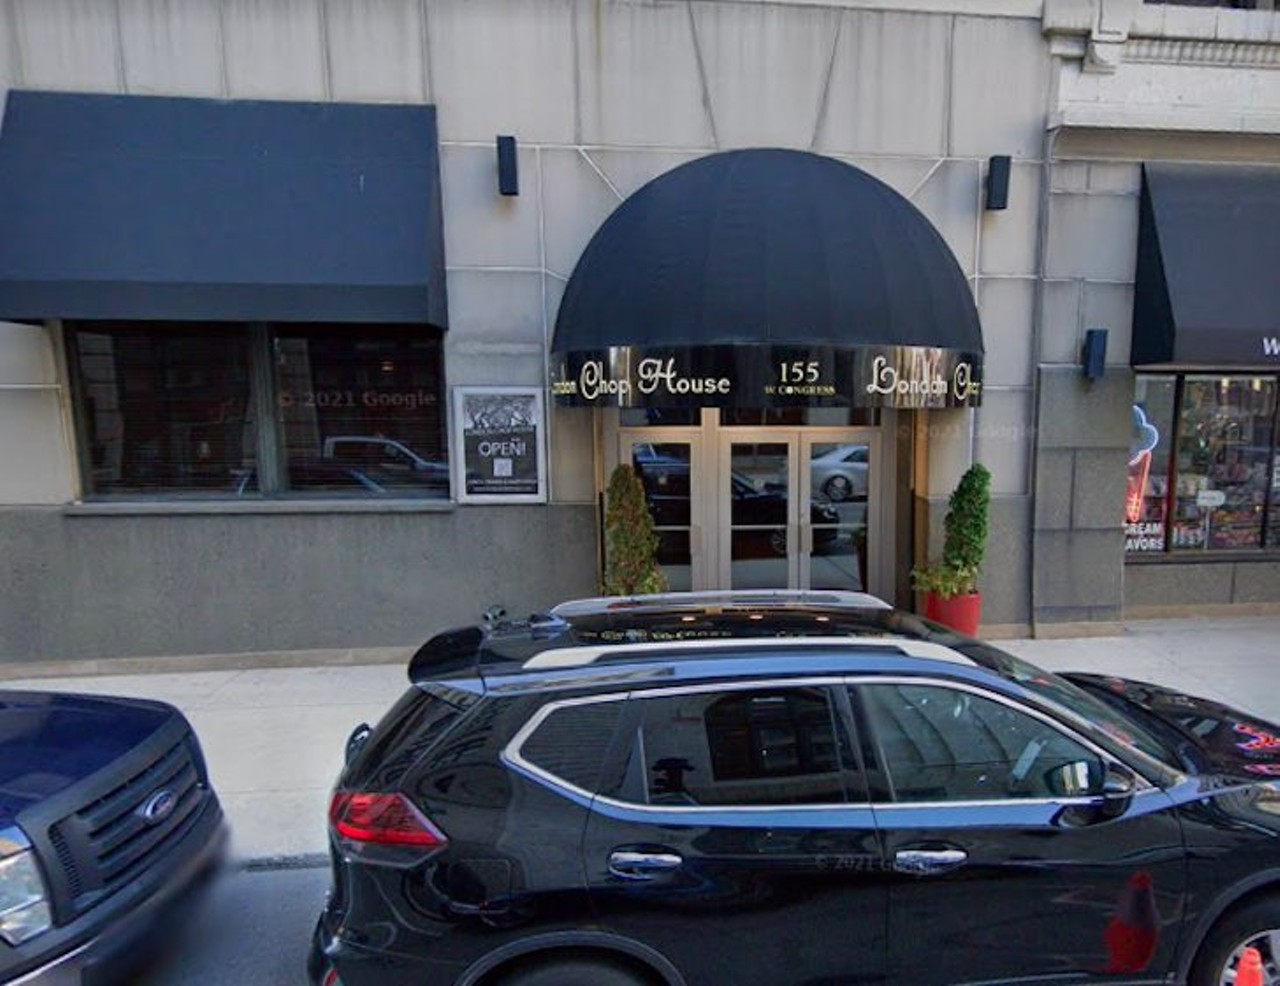 6. The London Chop House
155 W. Congress St., Detroit; 313-962-0277
&#147;Great staff, perfectly cooked steak and wonderful flavor. Sides are always tasty too. Pete is great! Love that they have live entertainment weekly.&#148; - Rosie J.
Photo via Google Maps